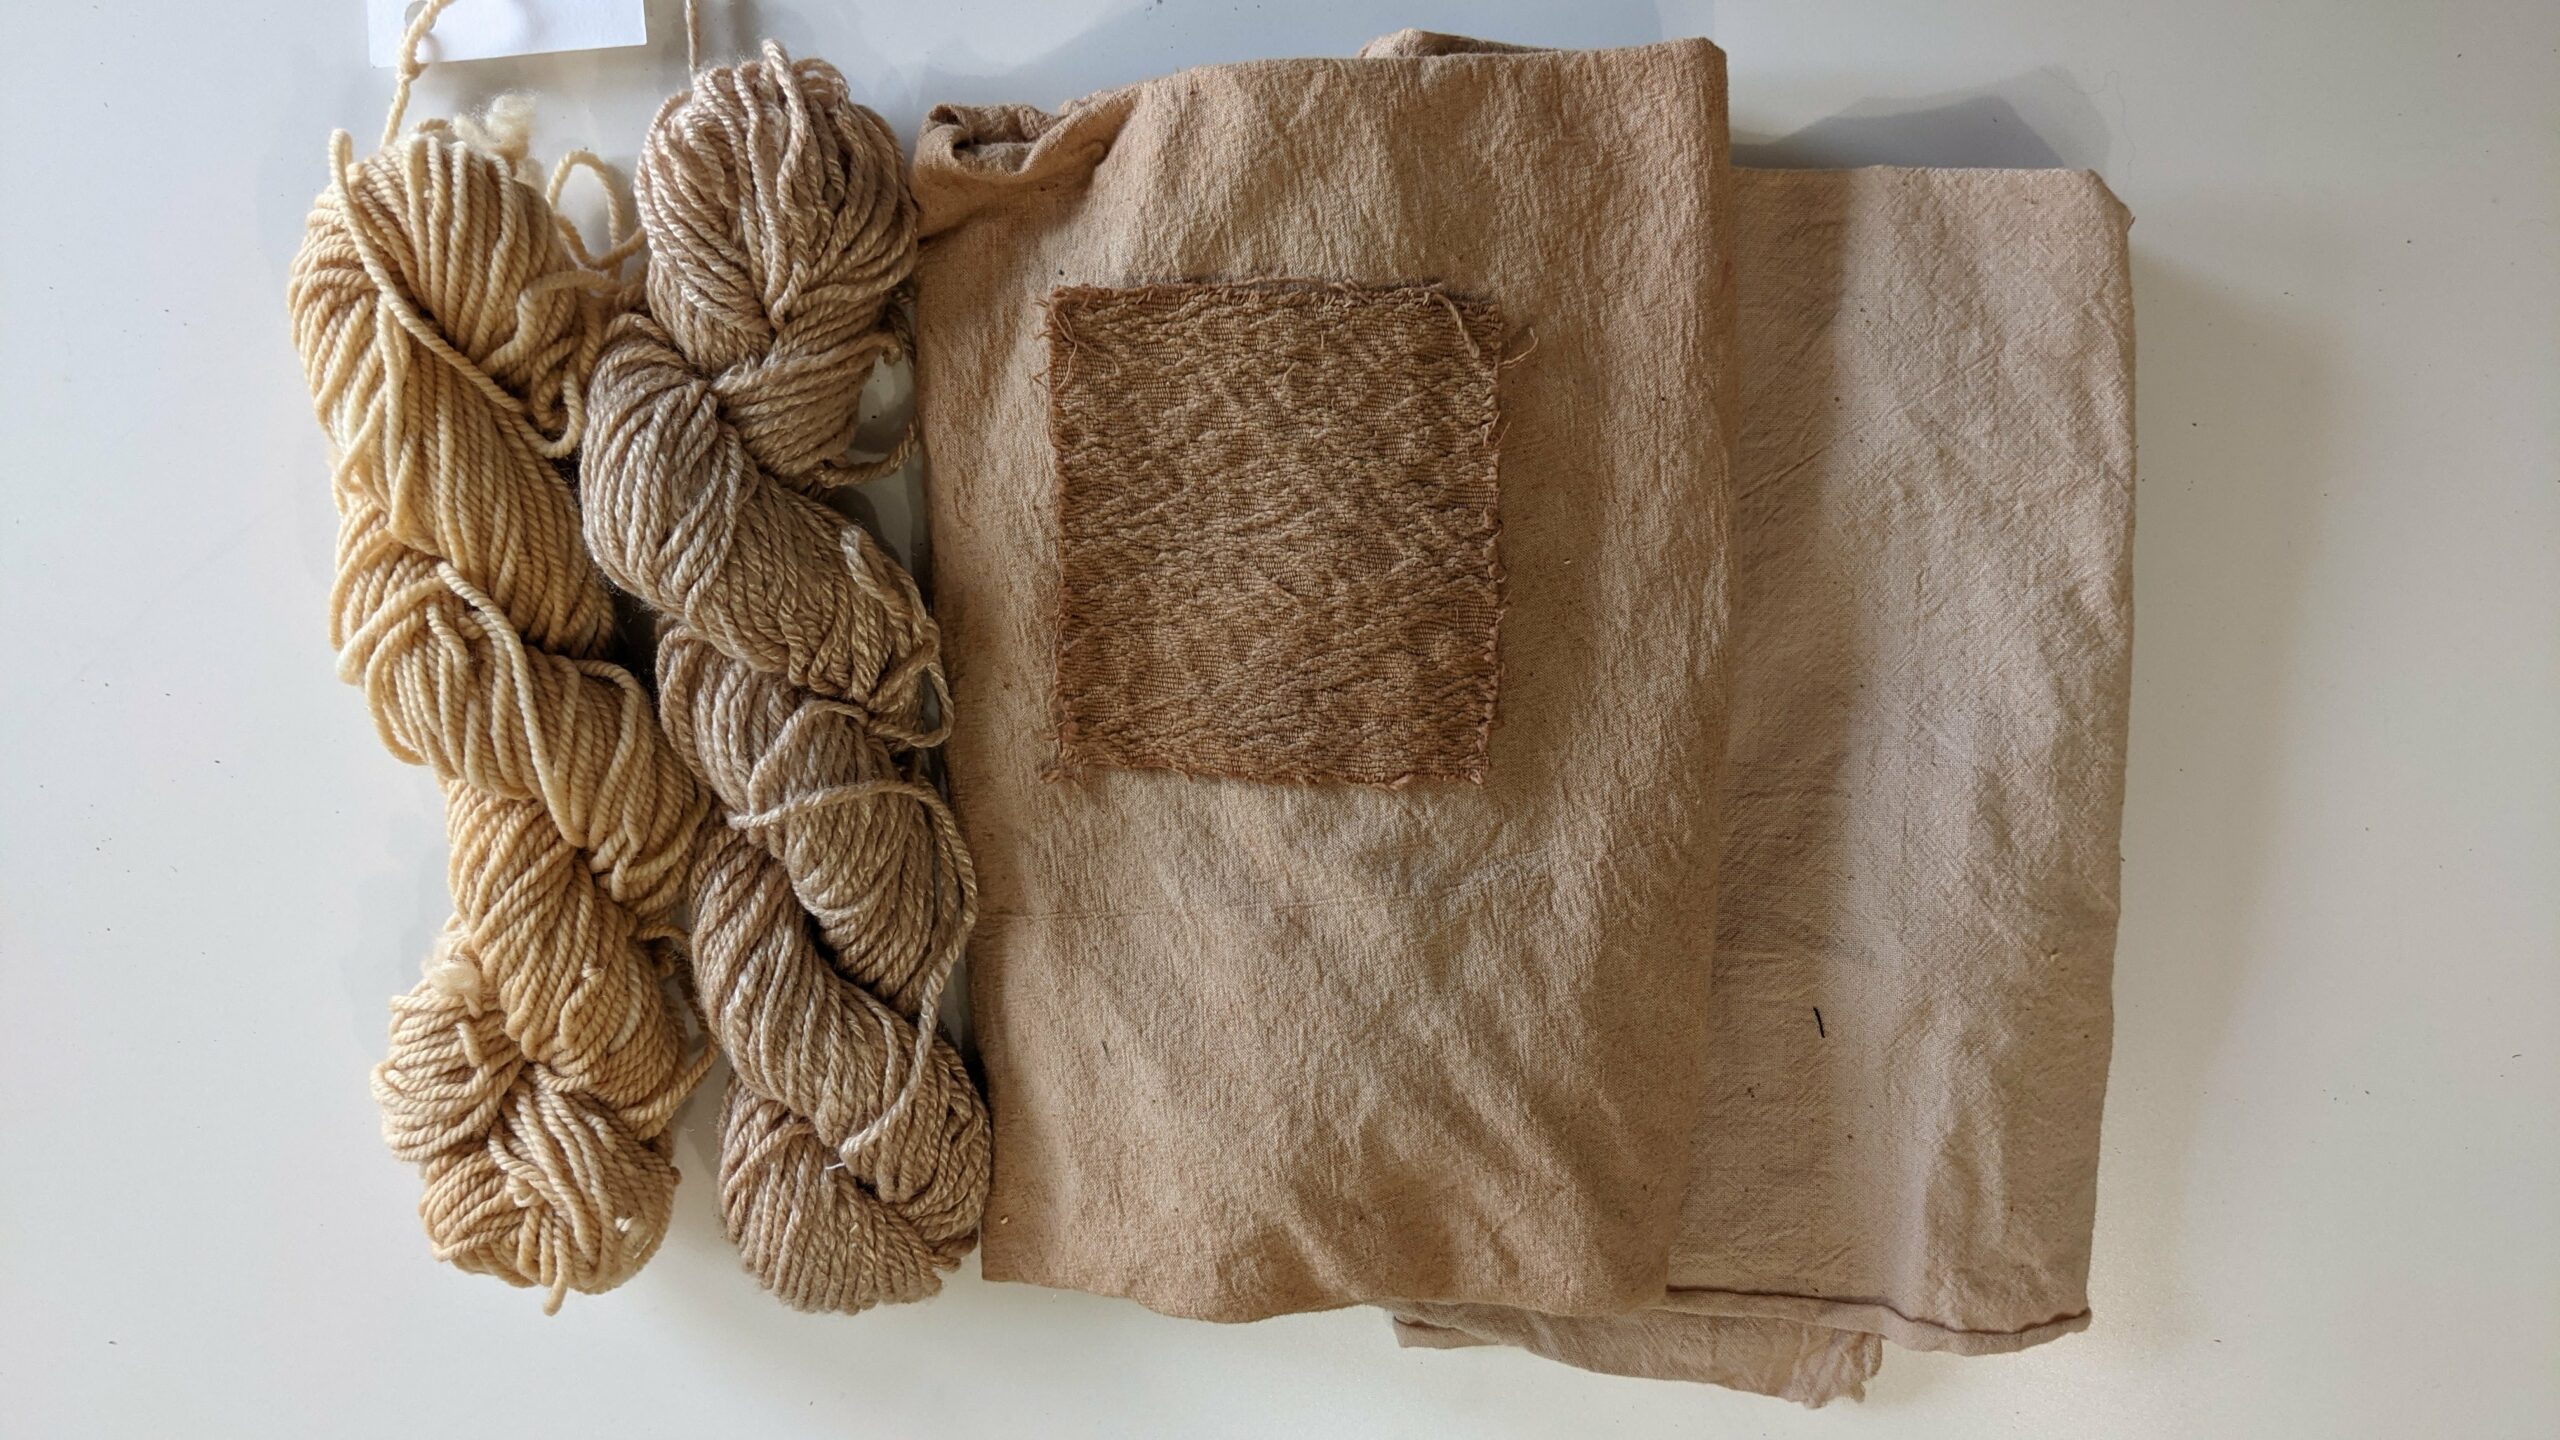 light brown skeins of yarn, and cotton fabrics naturally dyed